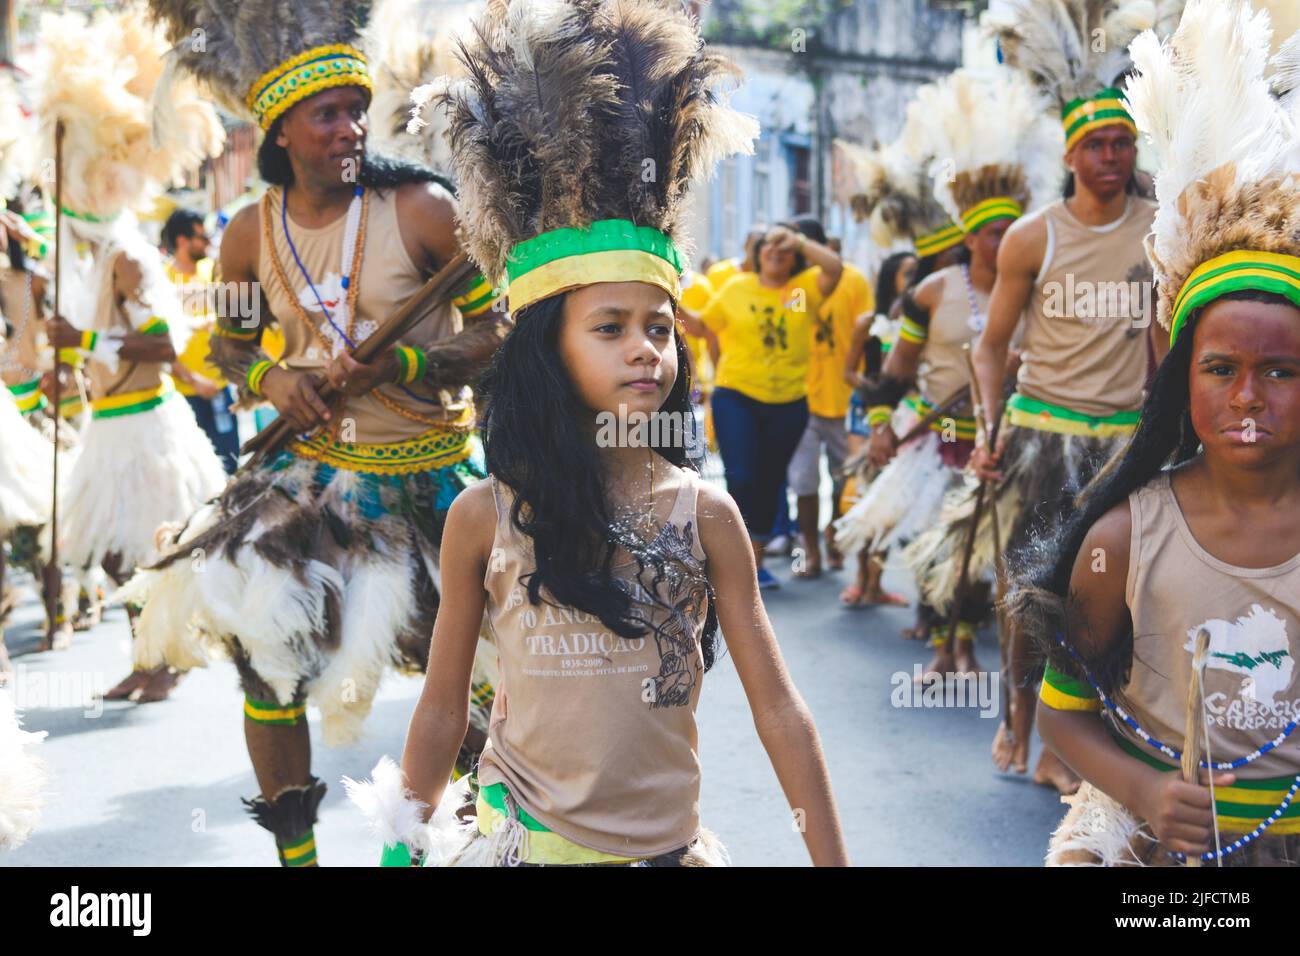 Salvador, Bahia, Brazil - July 02, 2017: Indigenous peoples participate protesting in the Dois de Julho cultural parade in Lapinha neighborhood in Sal Stock Photo